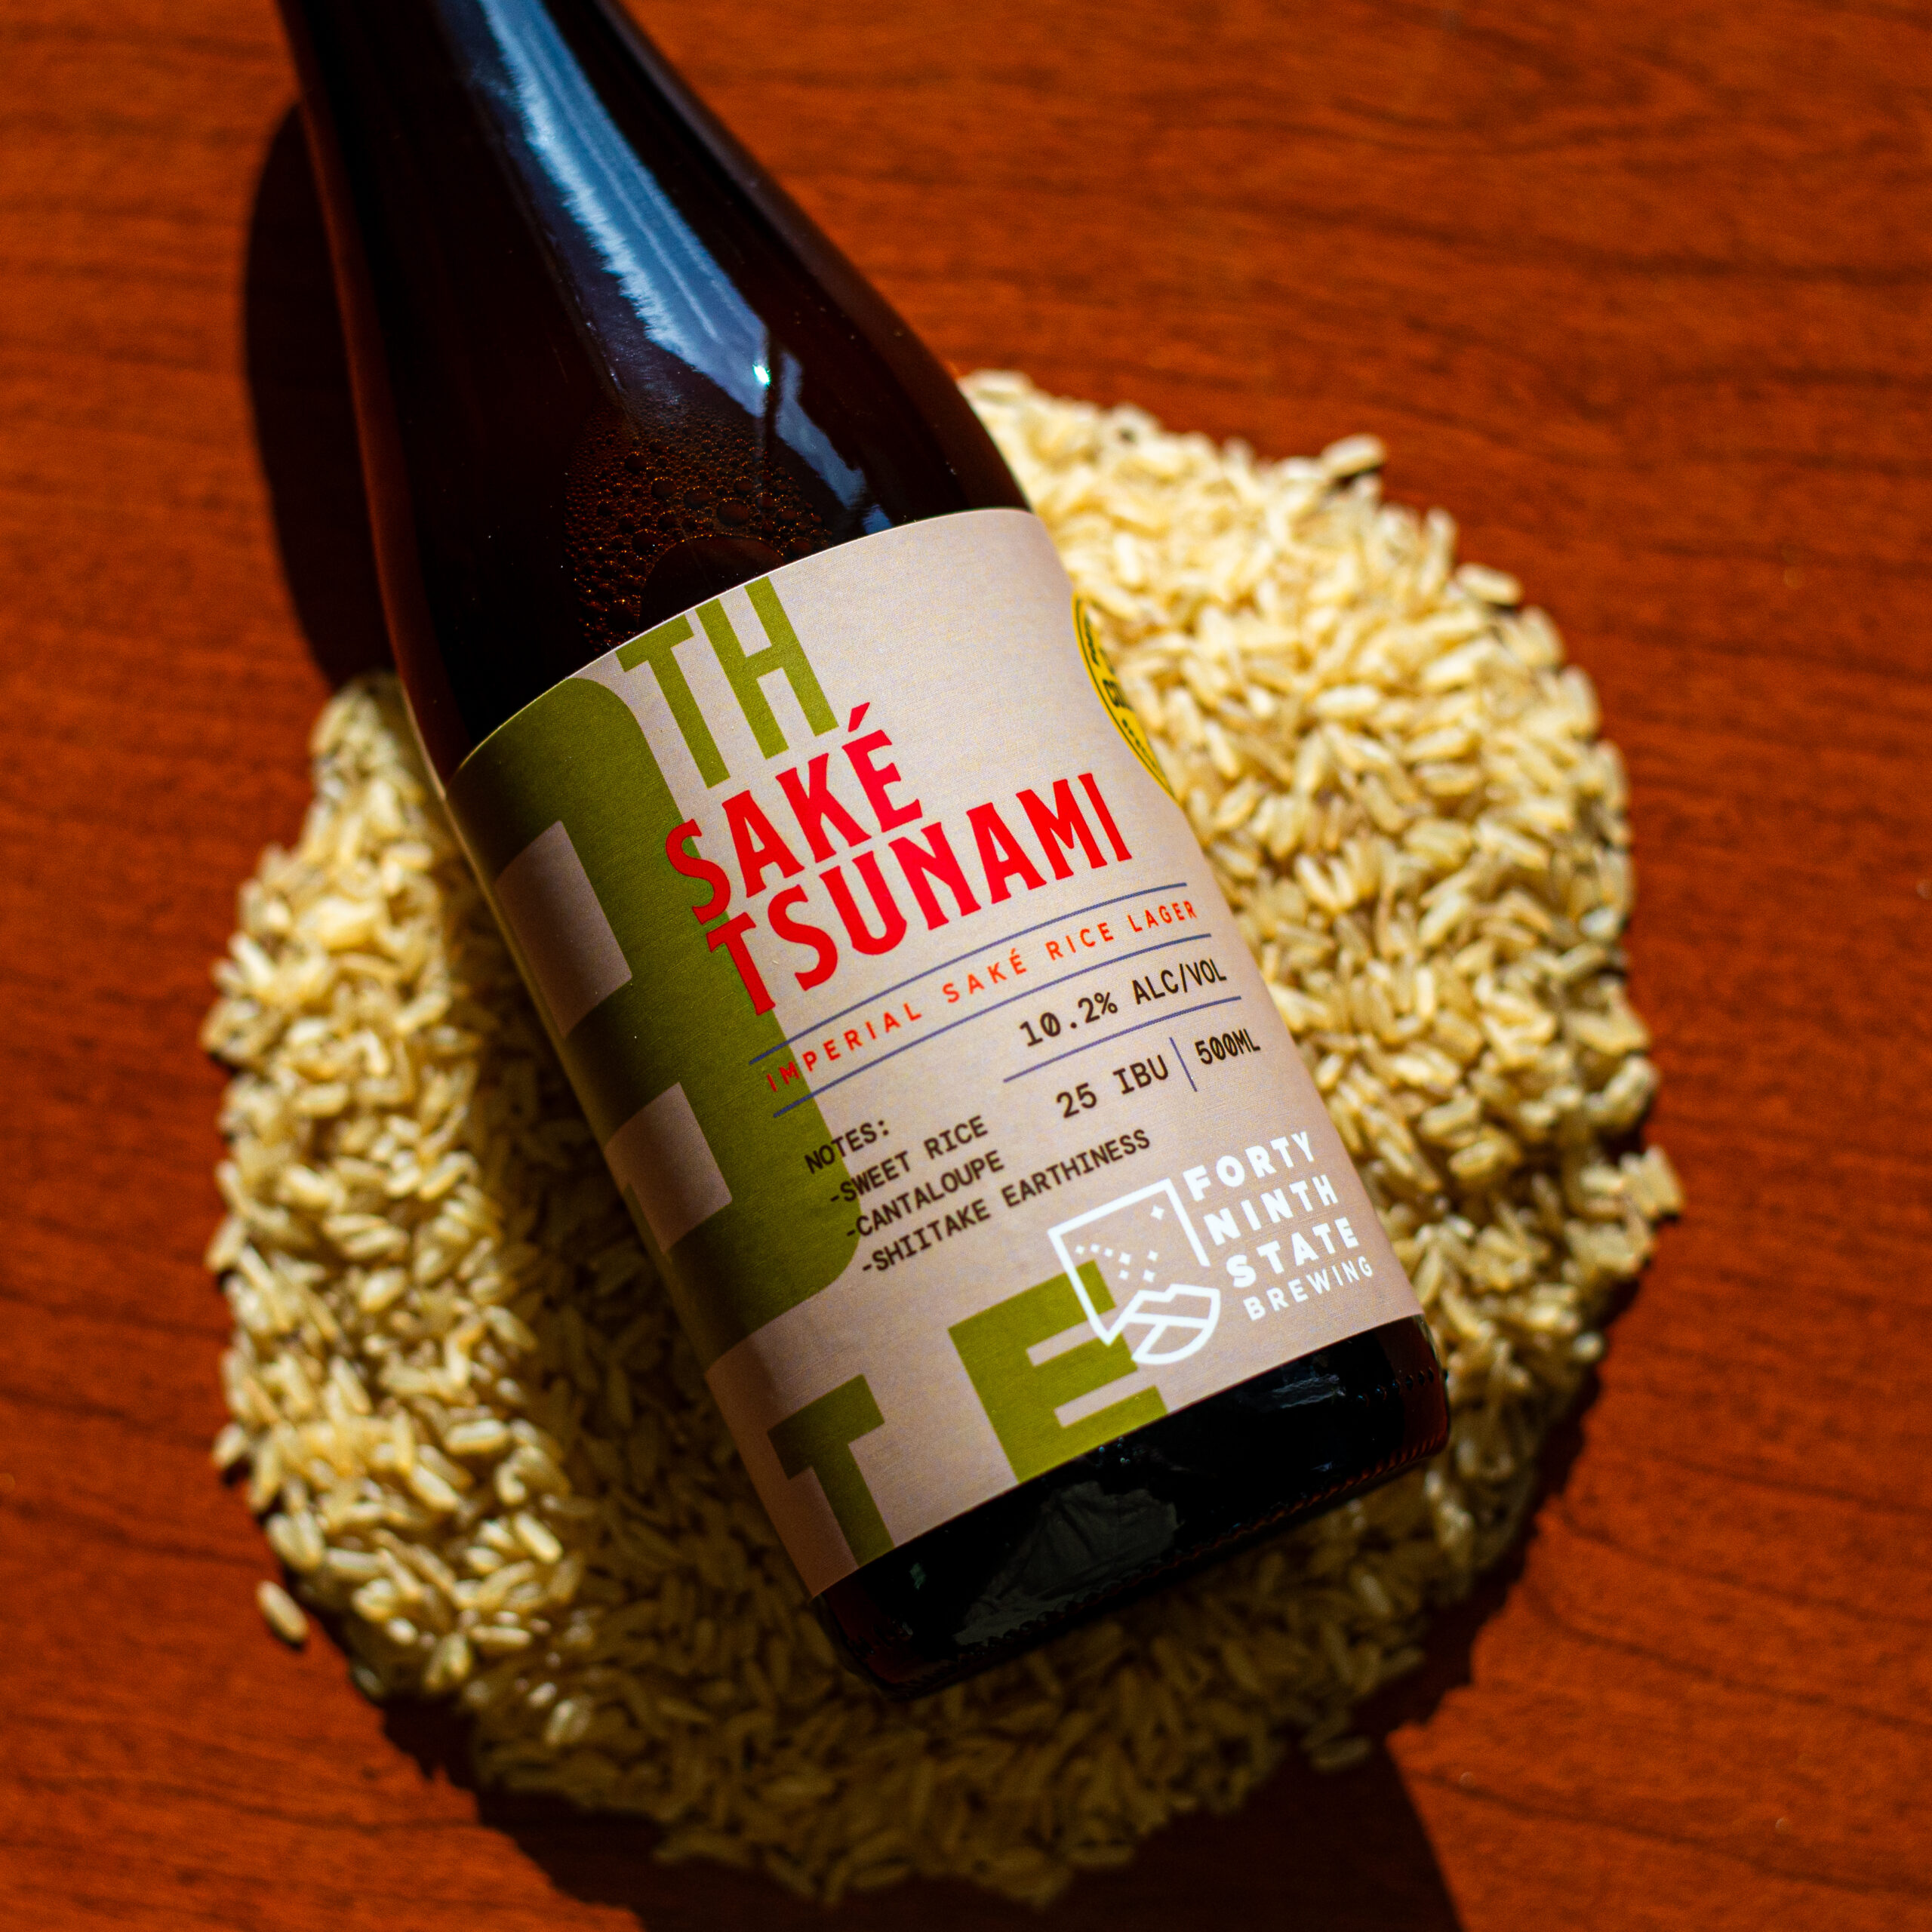 A bottle of sake beer laying on top of rice